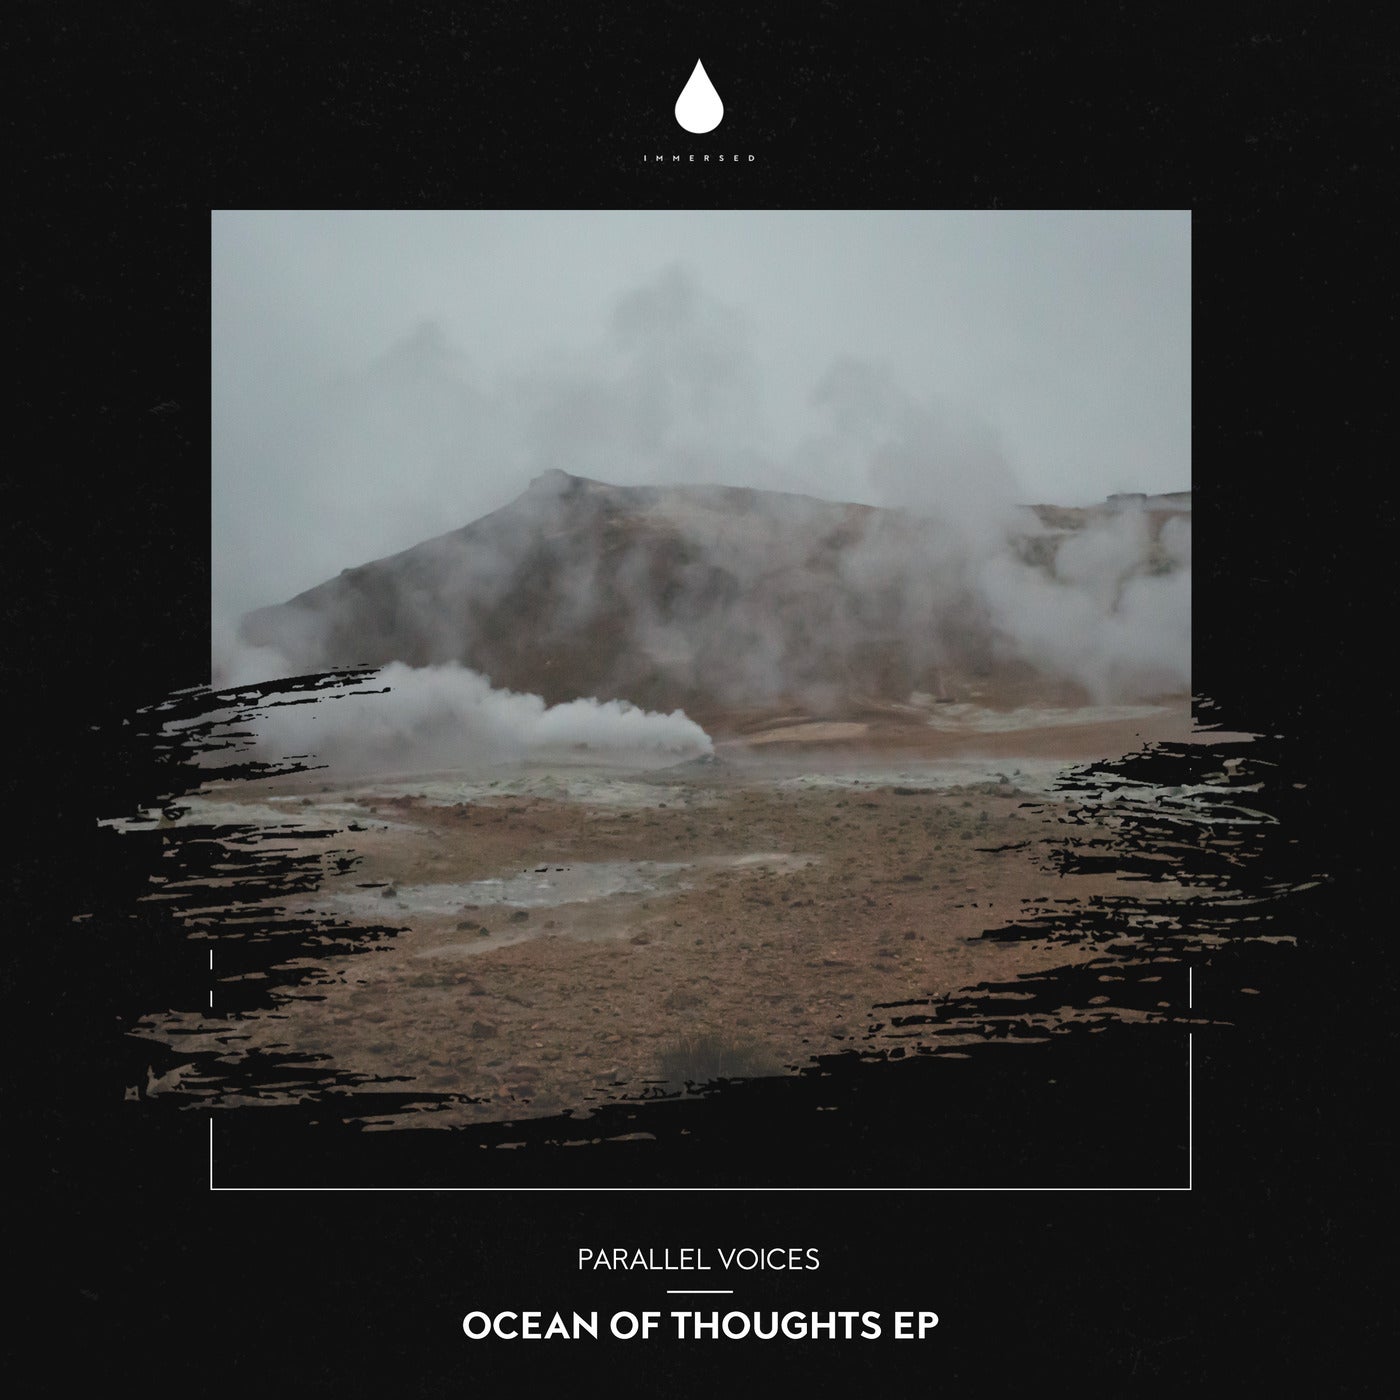 Parallel Voices – Ocean of Thoughts EP [IMM022DJ]